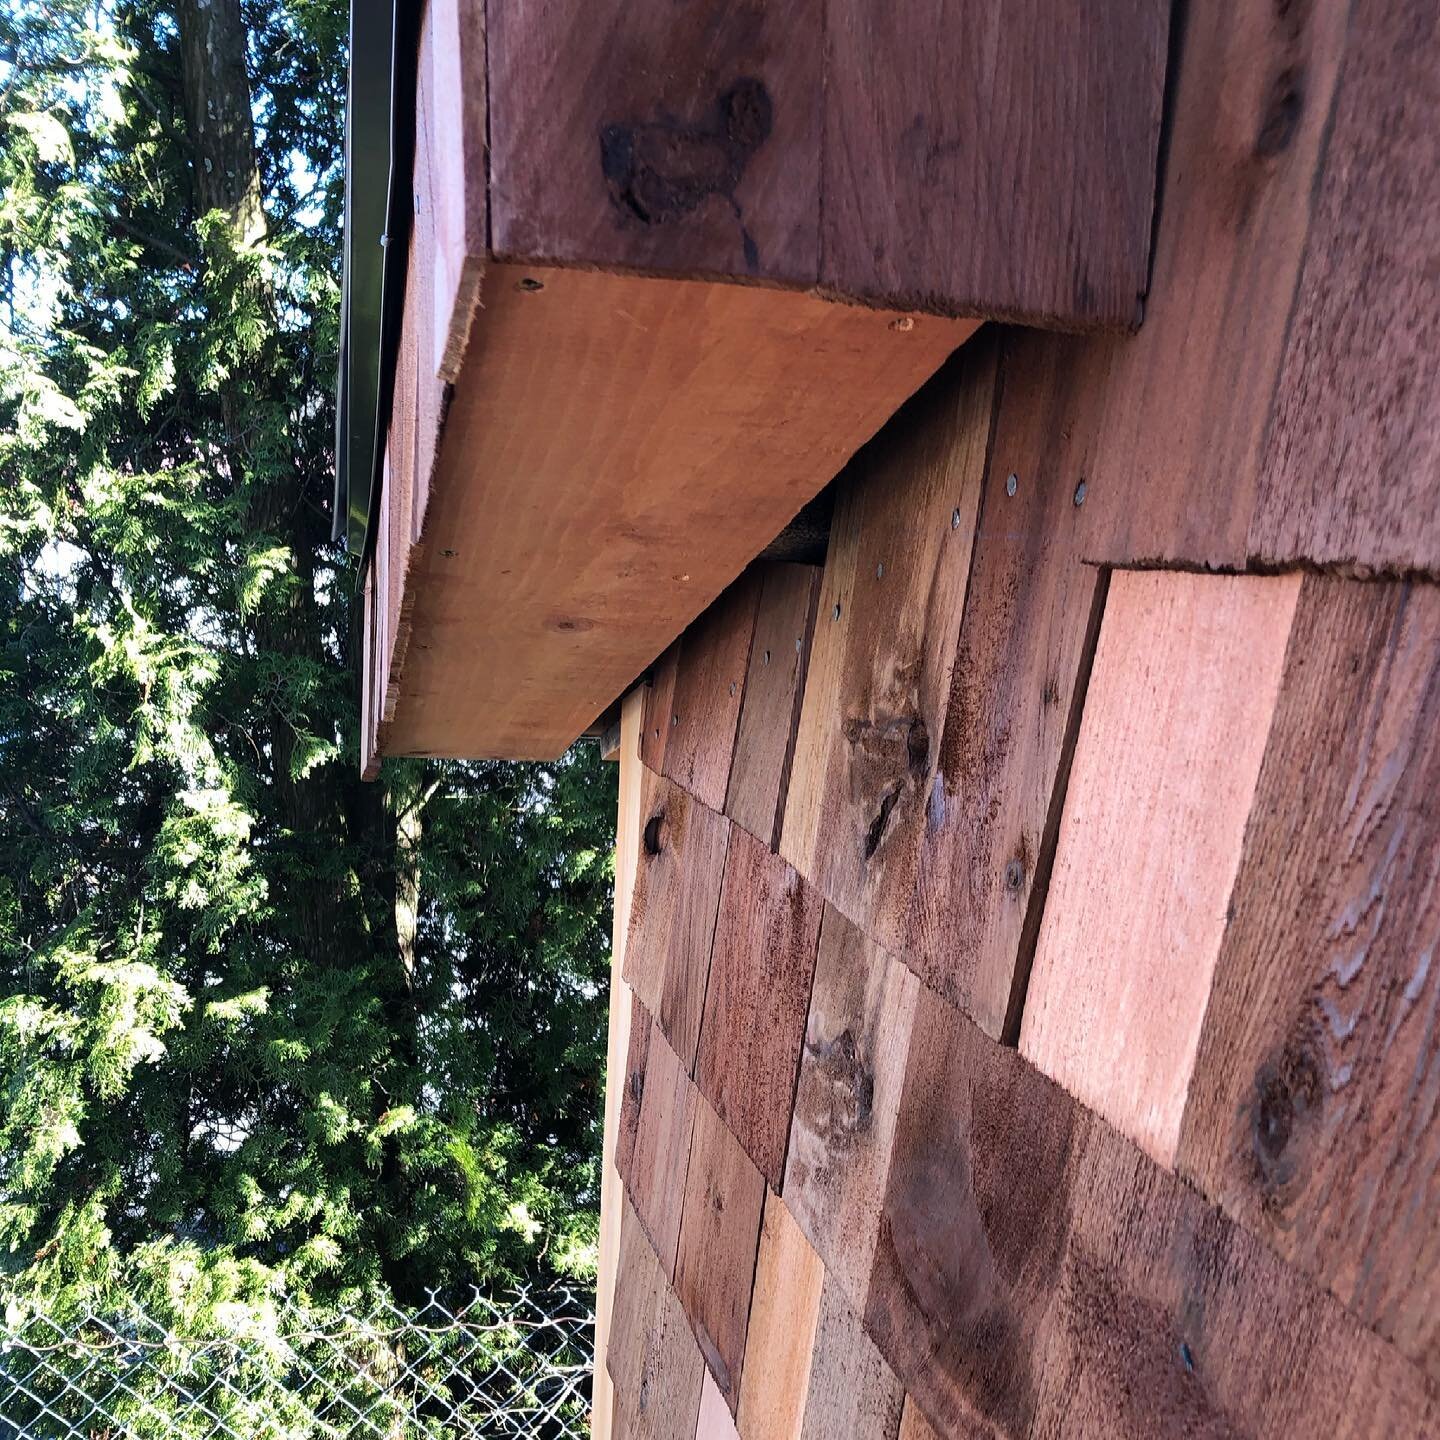 The unique details of each shingle are what makes the full appearance so wonderful.

#cedarshakes #tinyhouse #diy